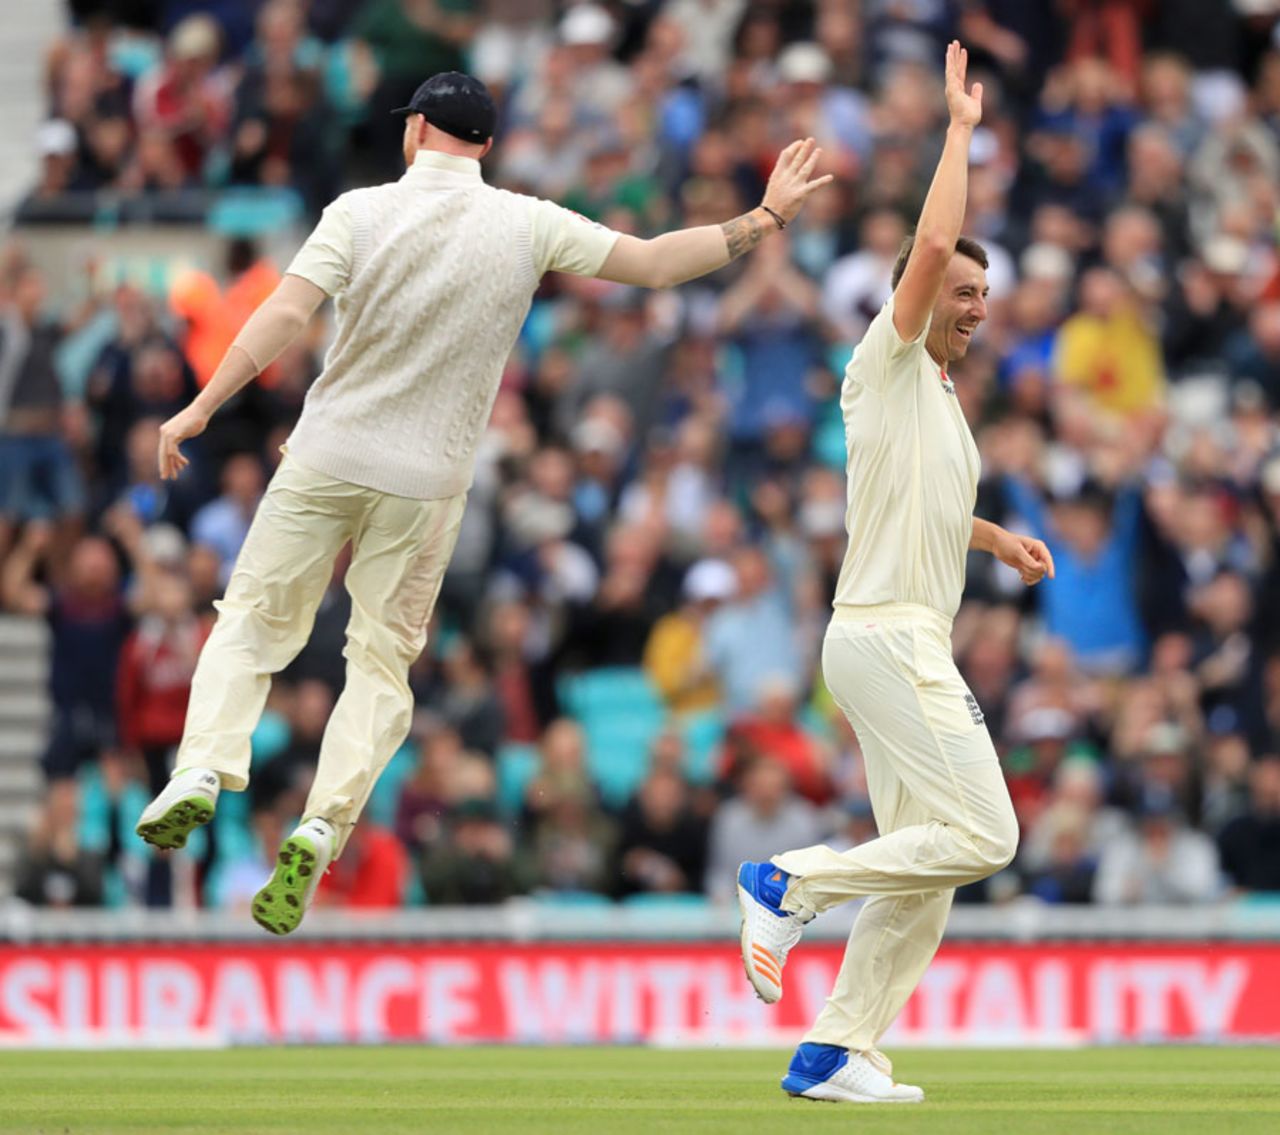 Toby Roland-Jones gets a high five from Ben Stokes, England v South Africa, 3rd Investec Test, The Oval, 2nd day, July 28, 2017